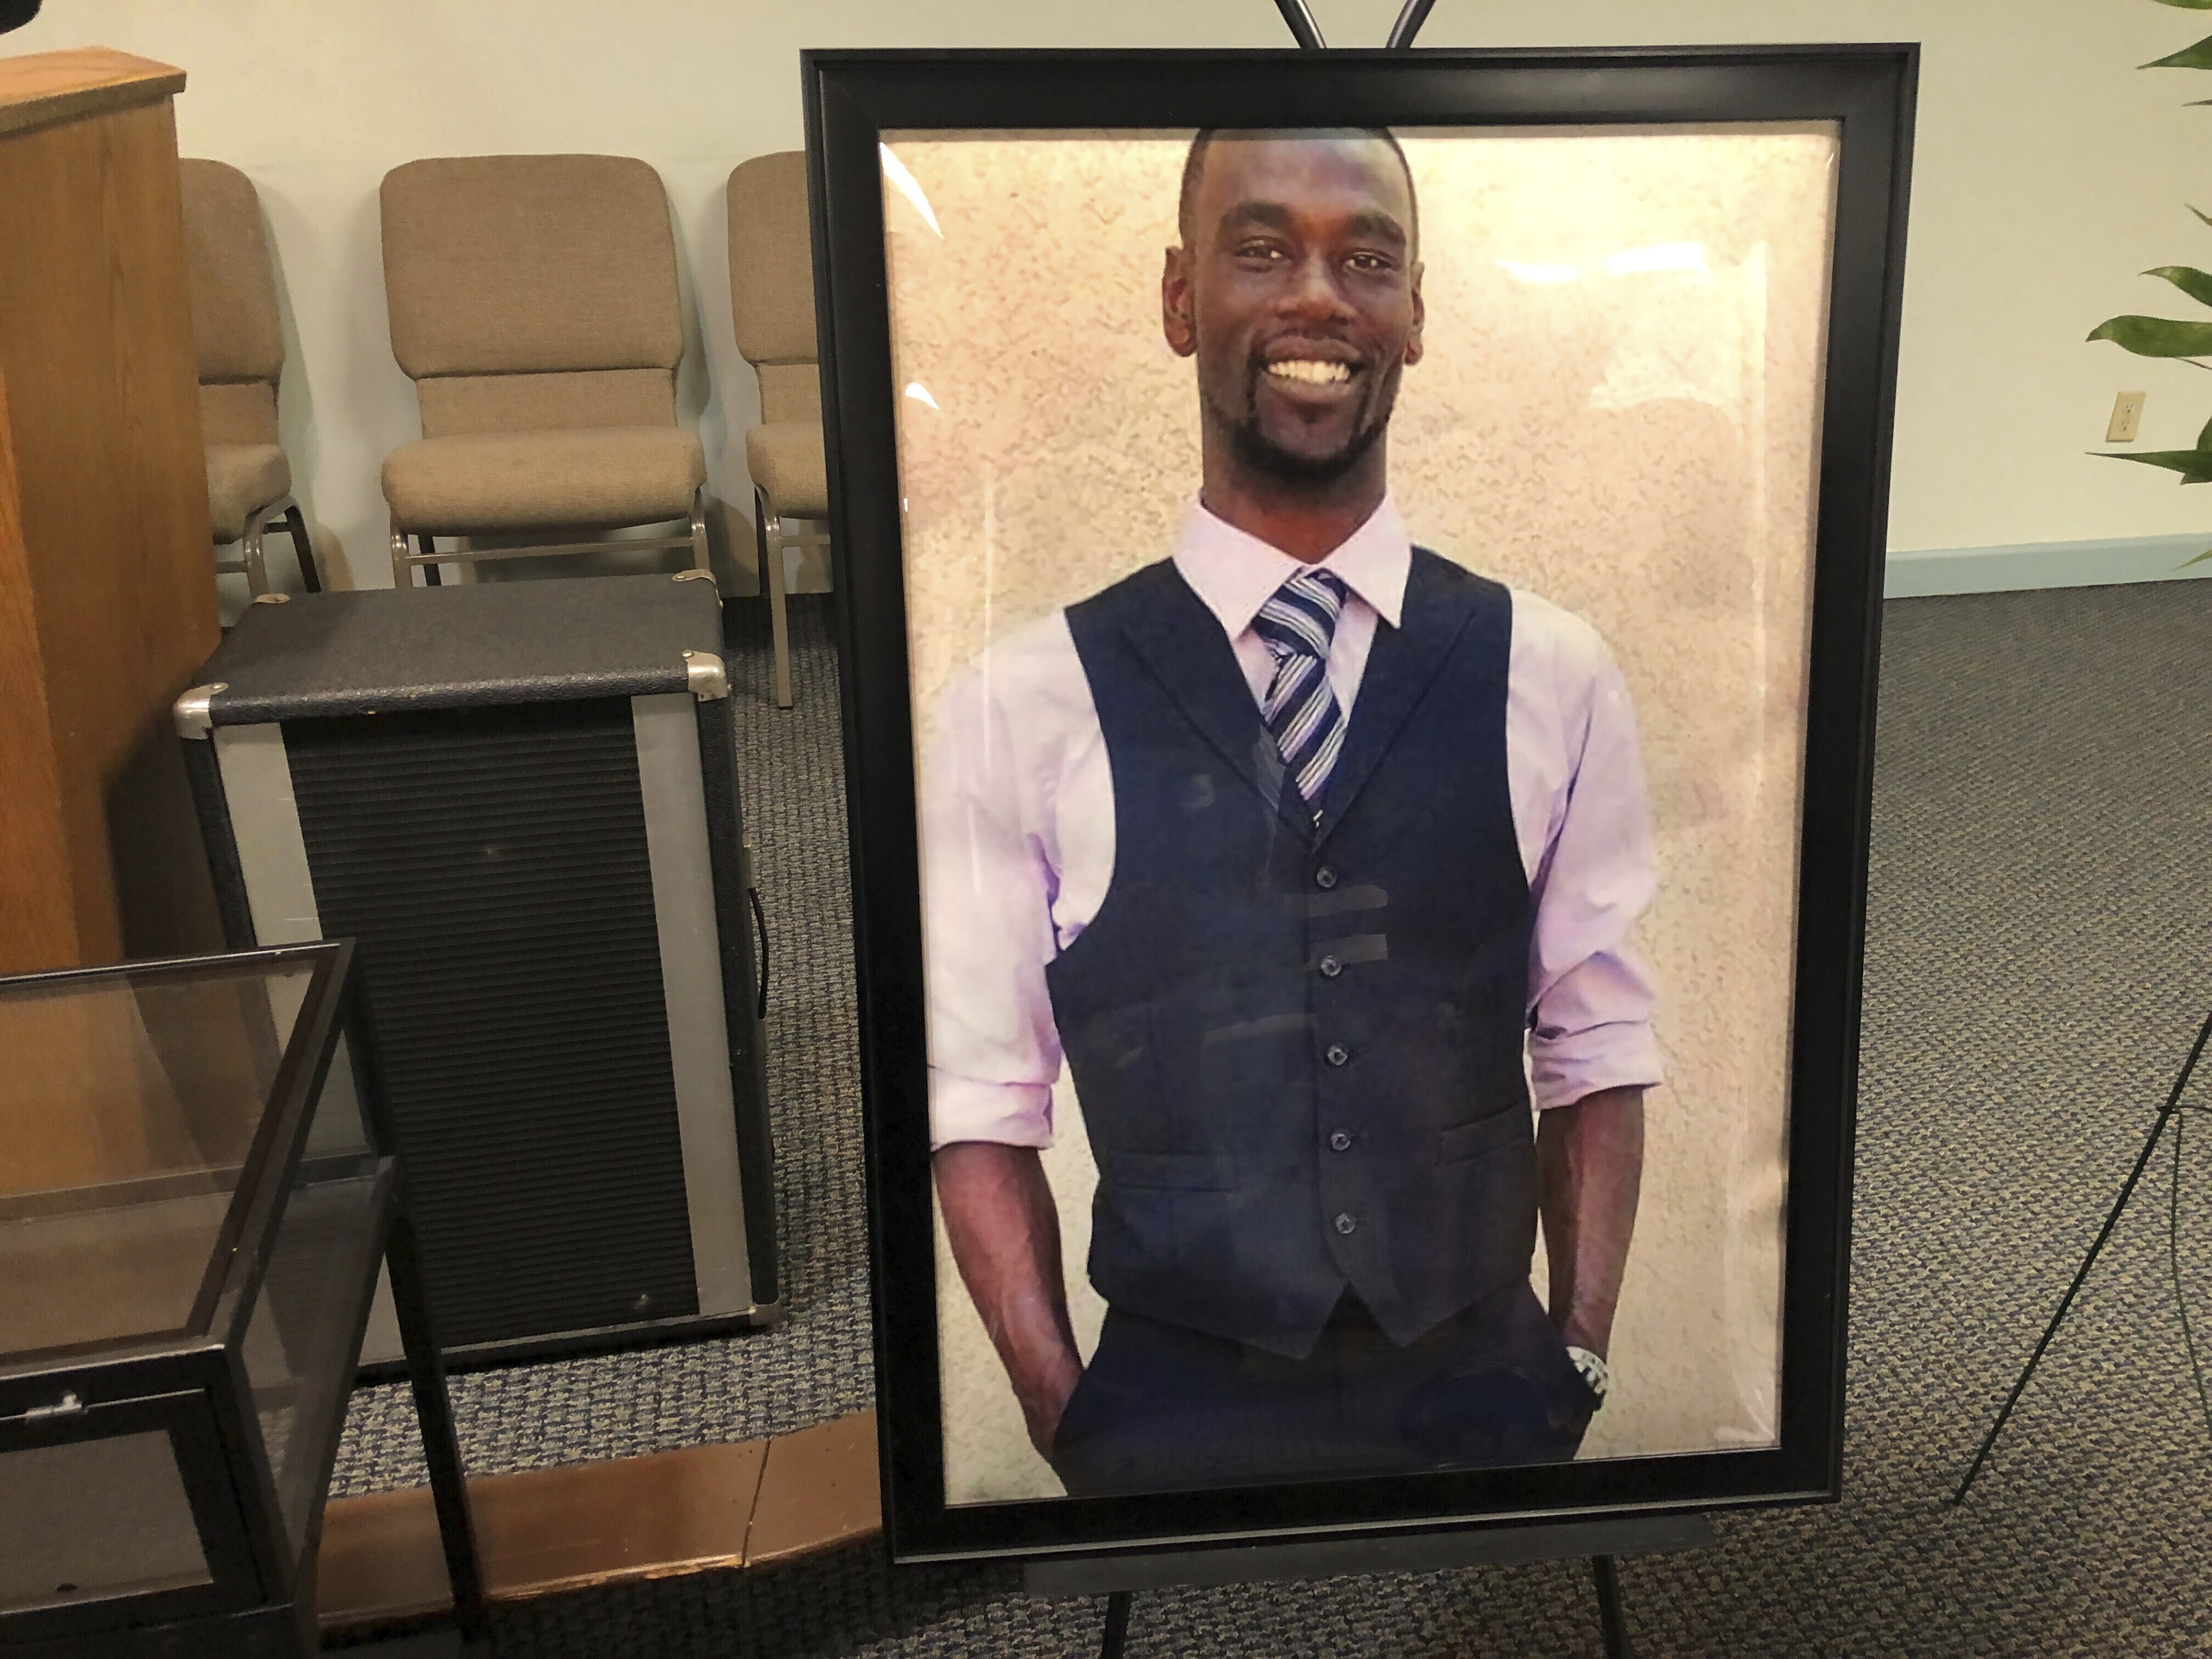 Live stream: Family of Tyre Nichols holds funeral services in Memphis